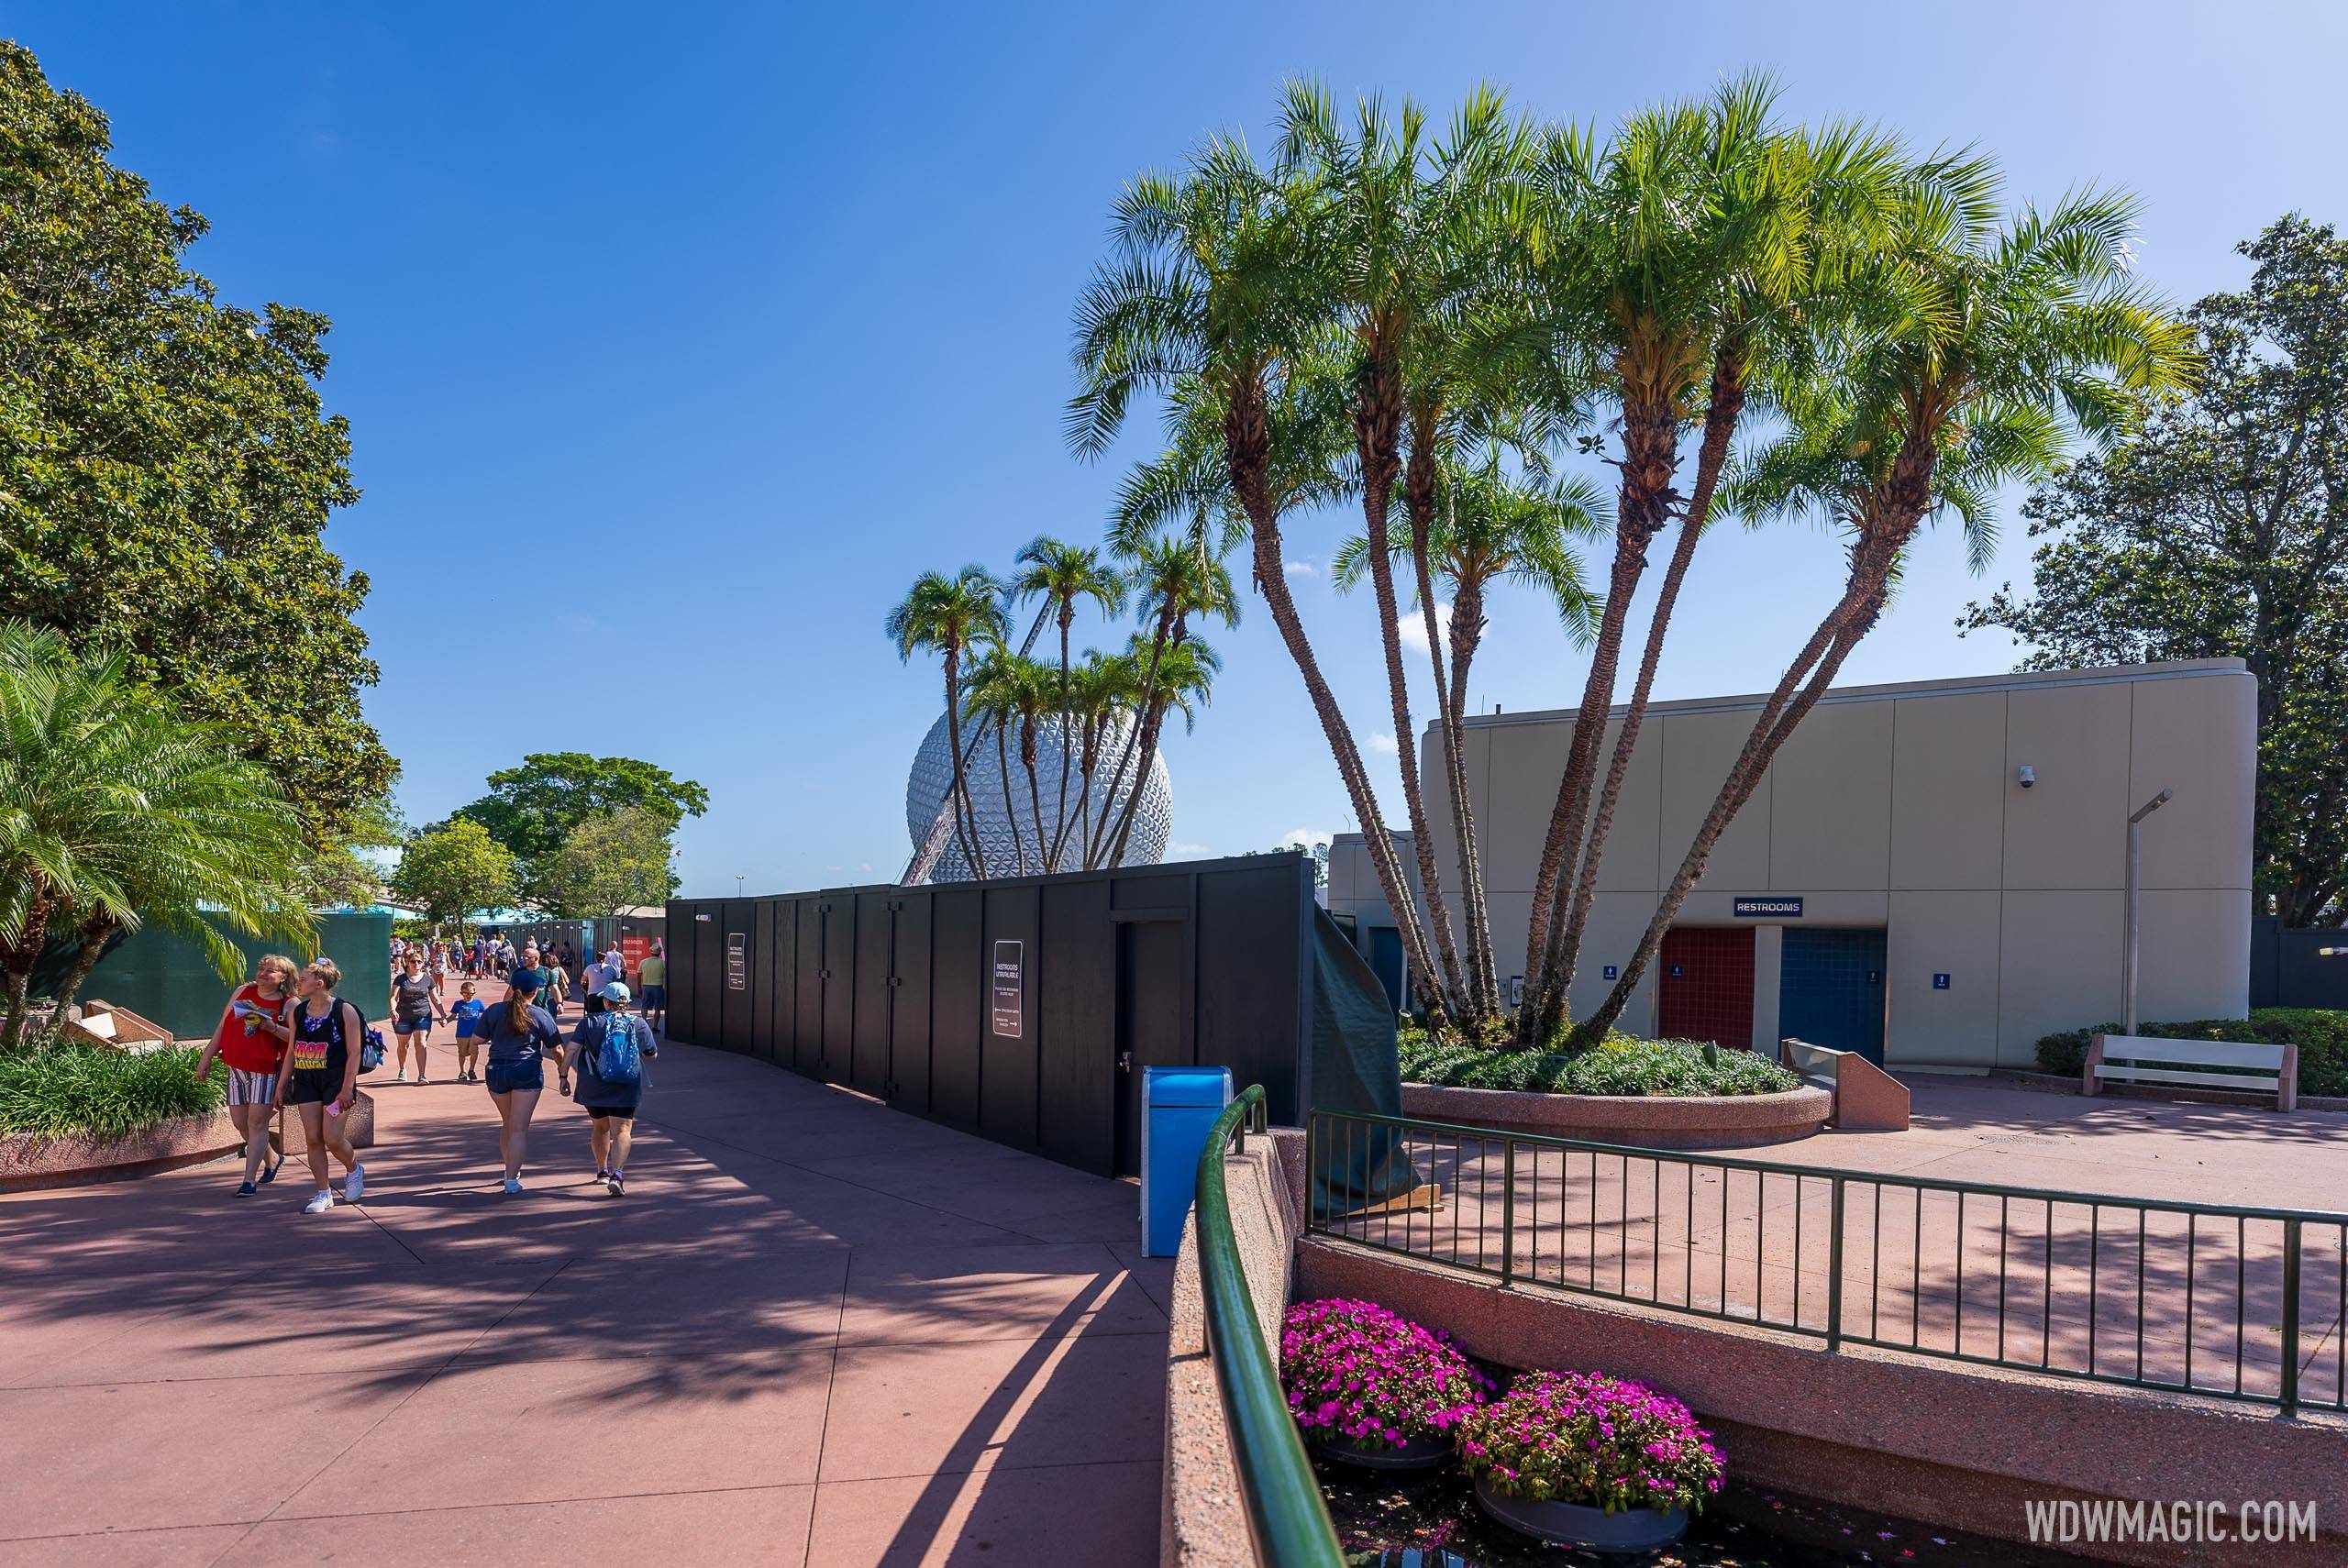 Construction walls expand in World Nature at EPCOT along with restroom closure